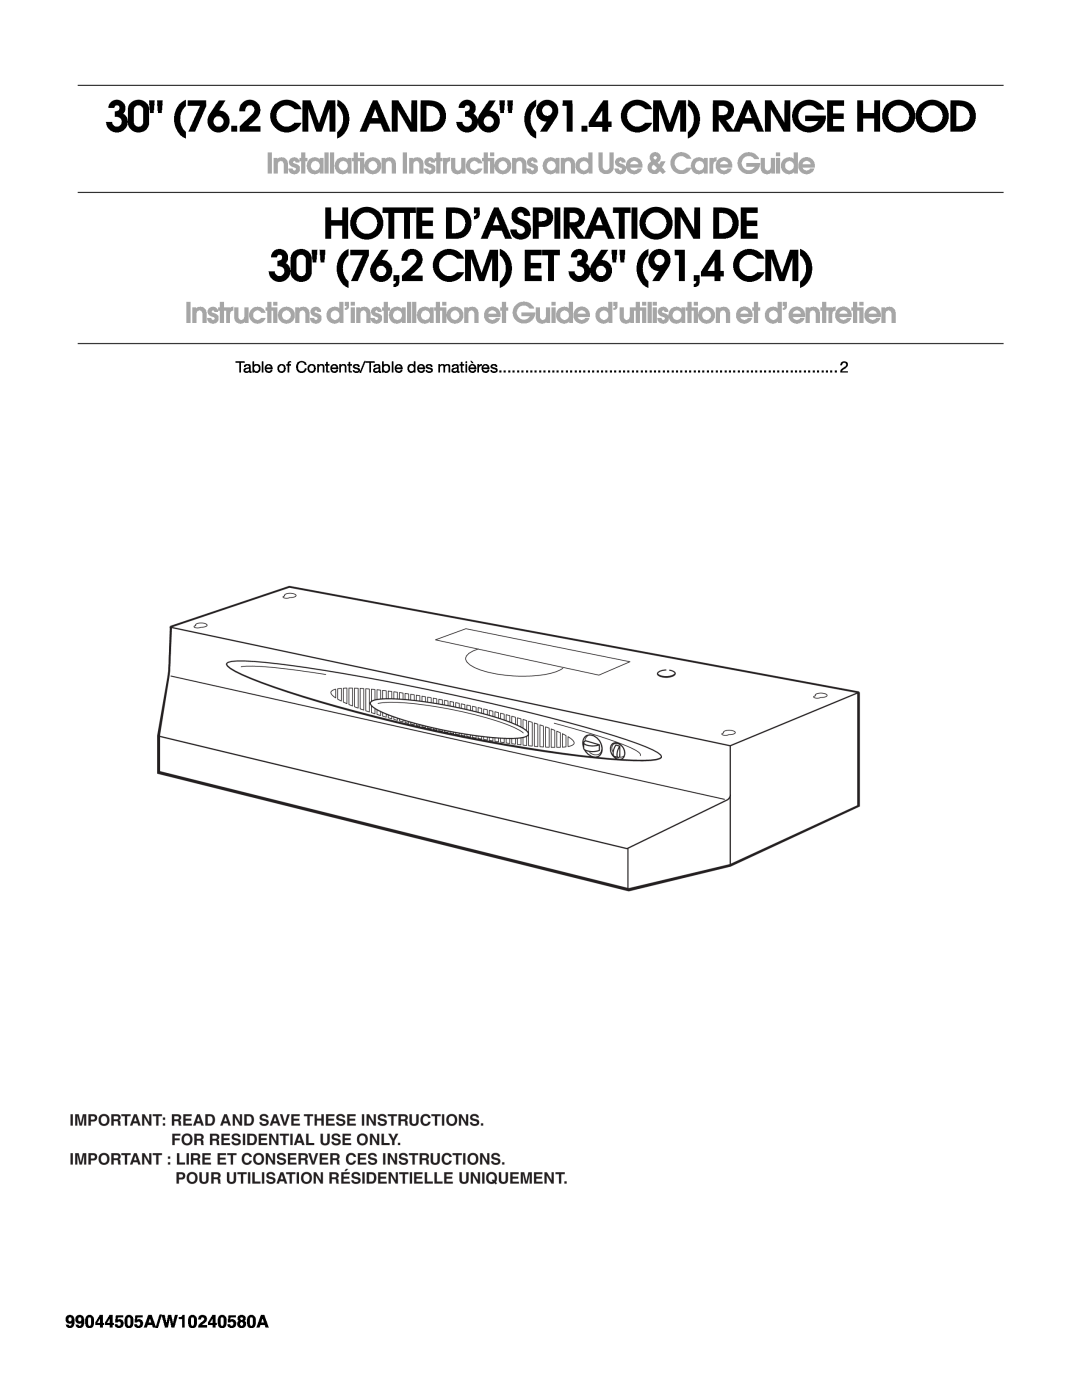 Whirlpool installation instructions 99044505A/W10240580A, 30 76.2 CM AND 36 91.4 CM RANGE HOOD 